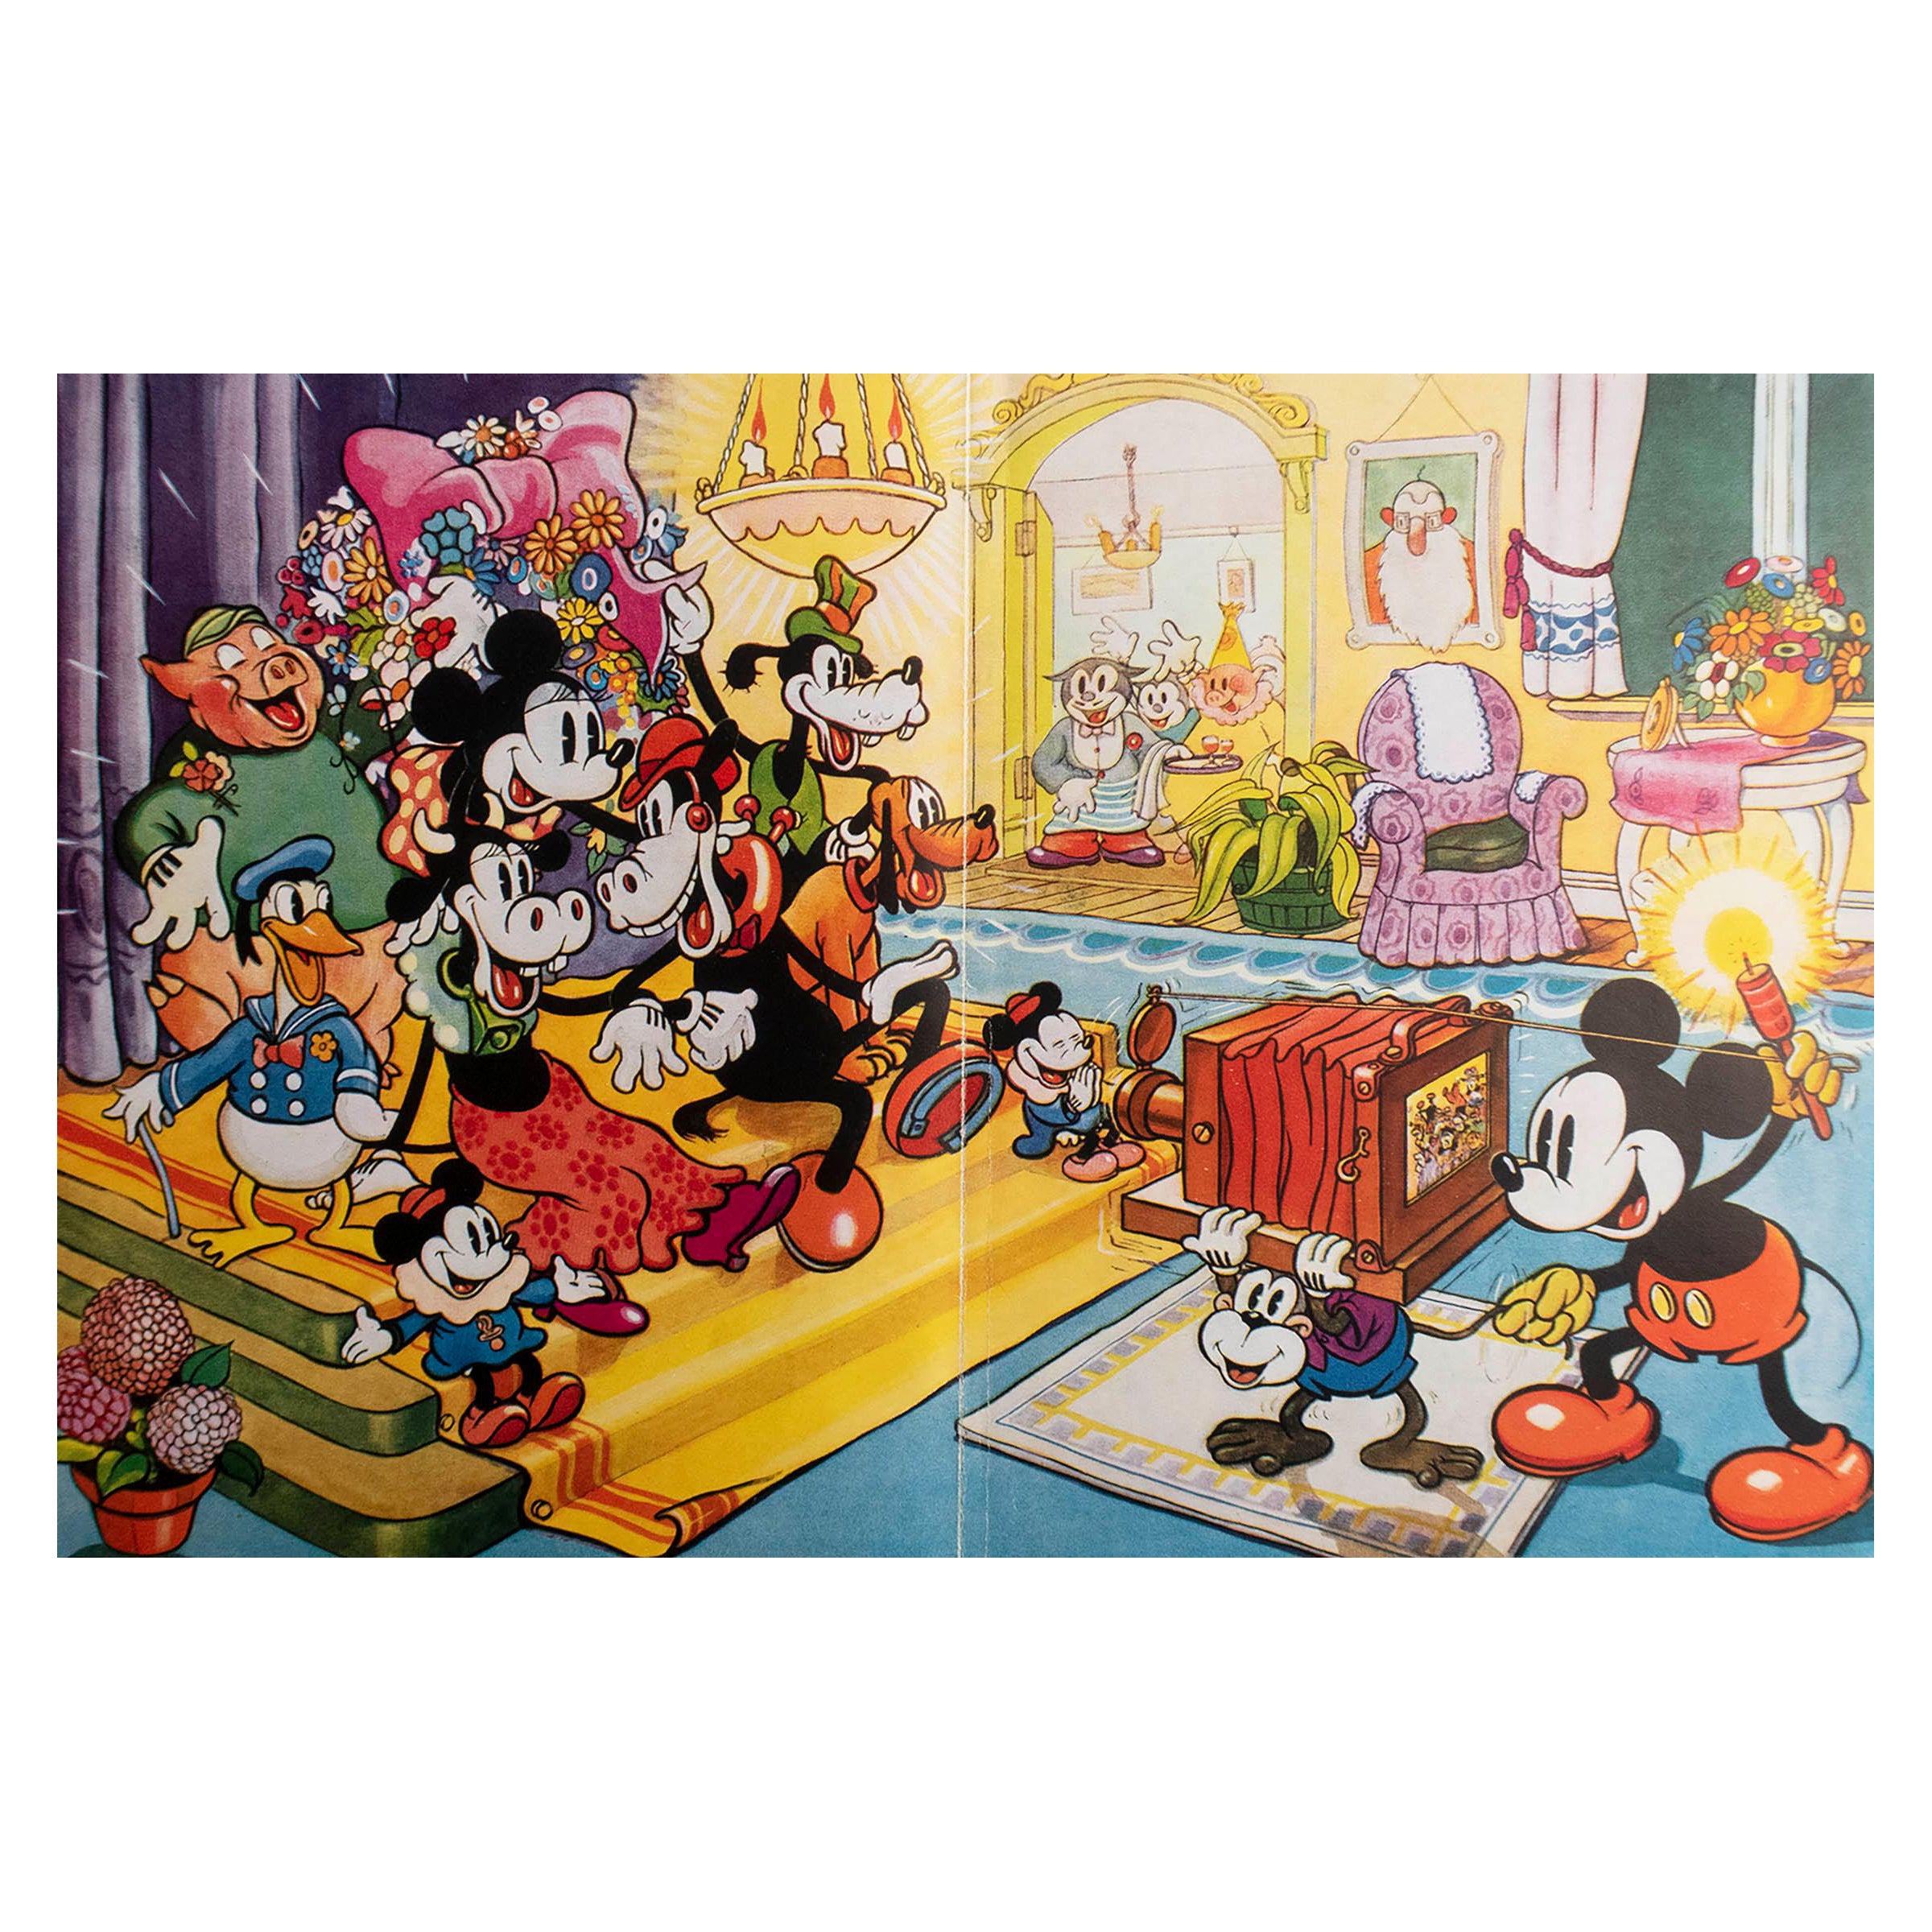 Original Vintage Mickey Mouse Print . 1930's For Sale